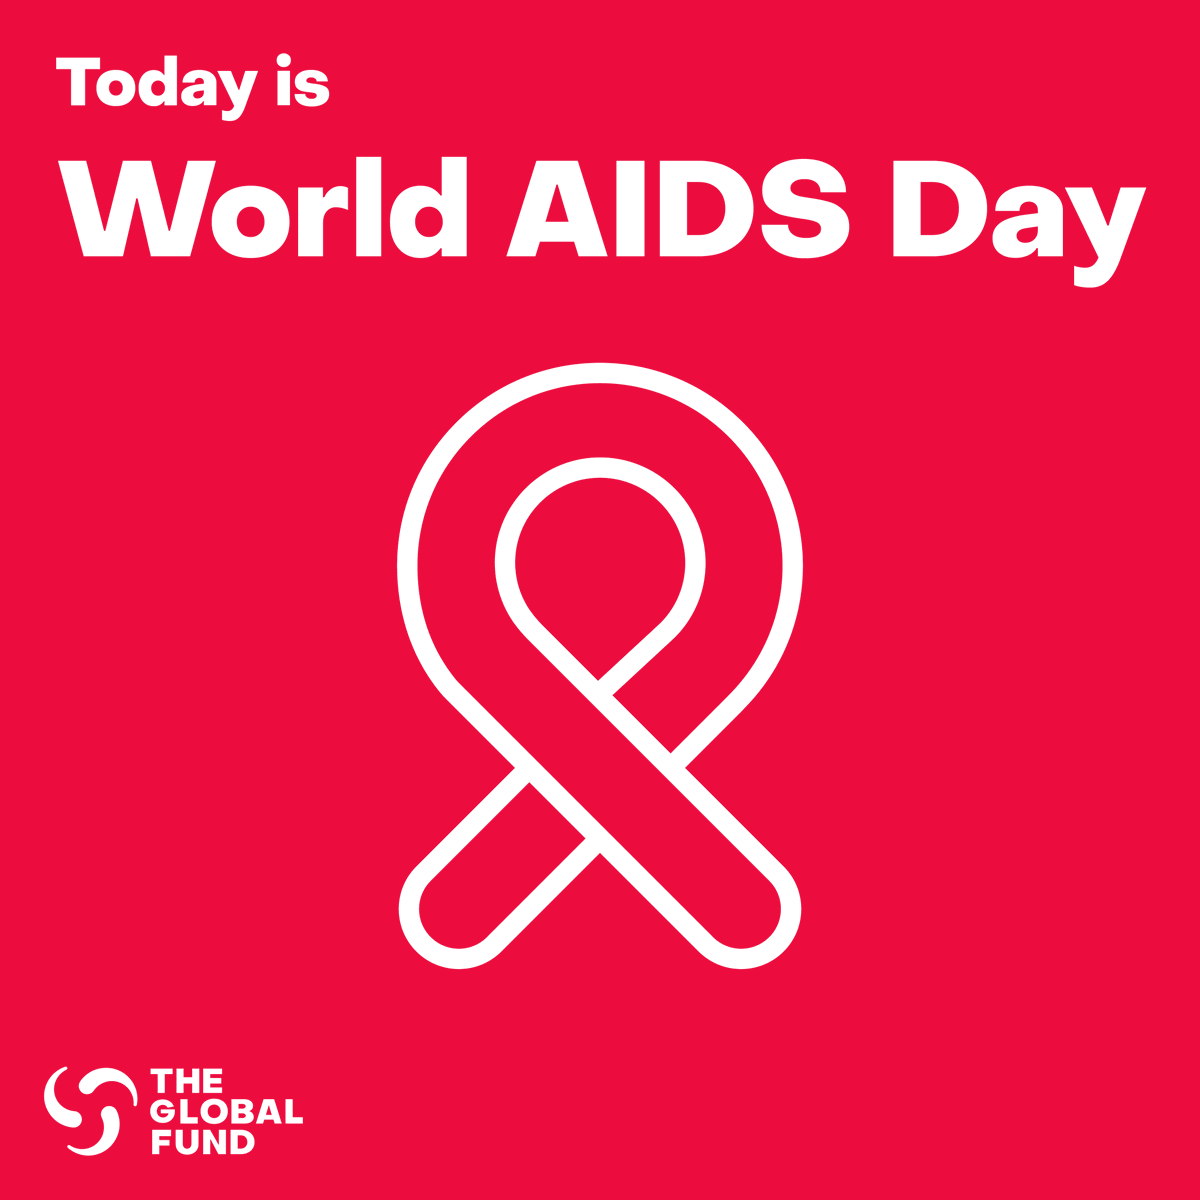 Today is #WorldAIDSDay. It’s time to get back on track to end AIDS as a public health threat once and for all. Working together, we must double down on our commitment to tackle the inequalities that fuel the epidemic.